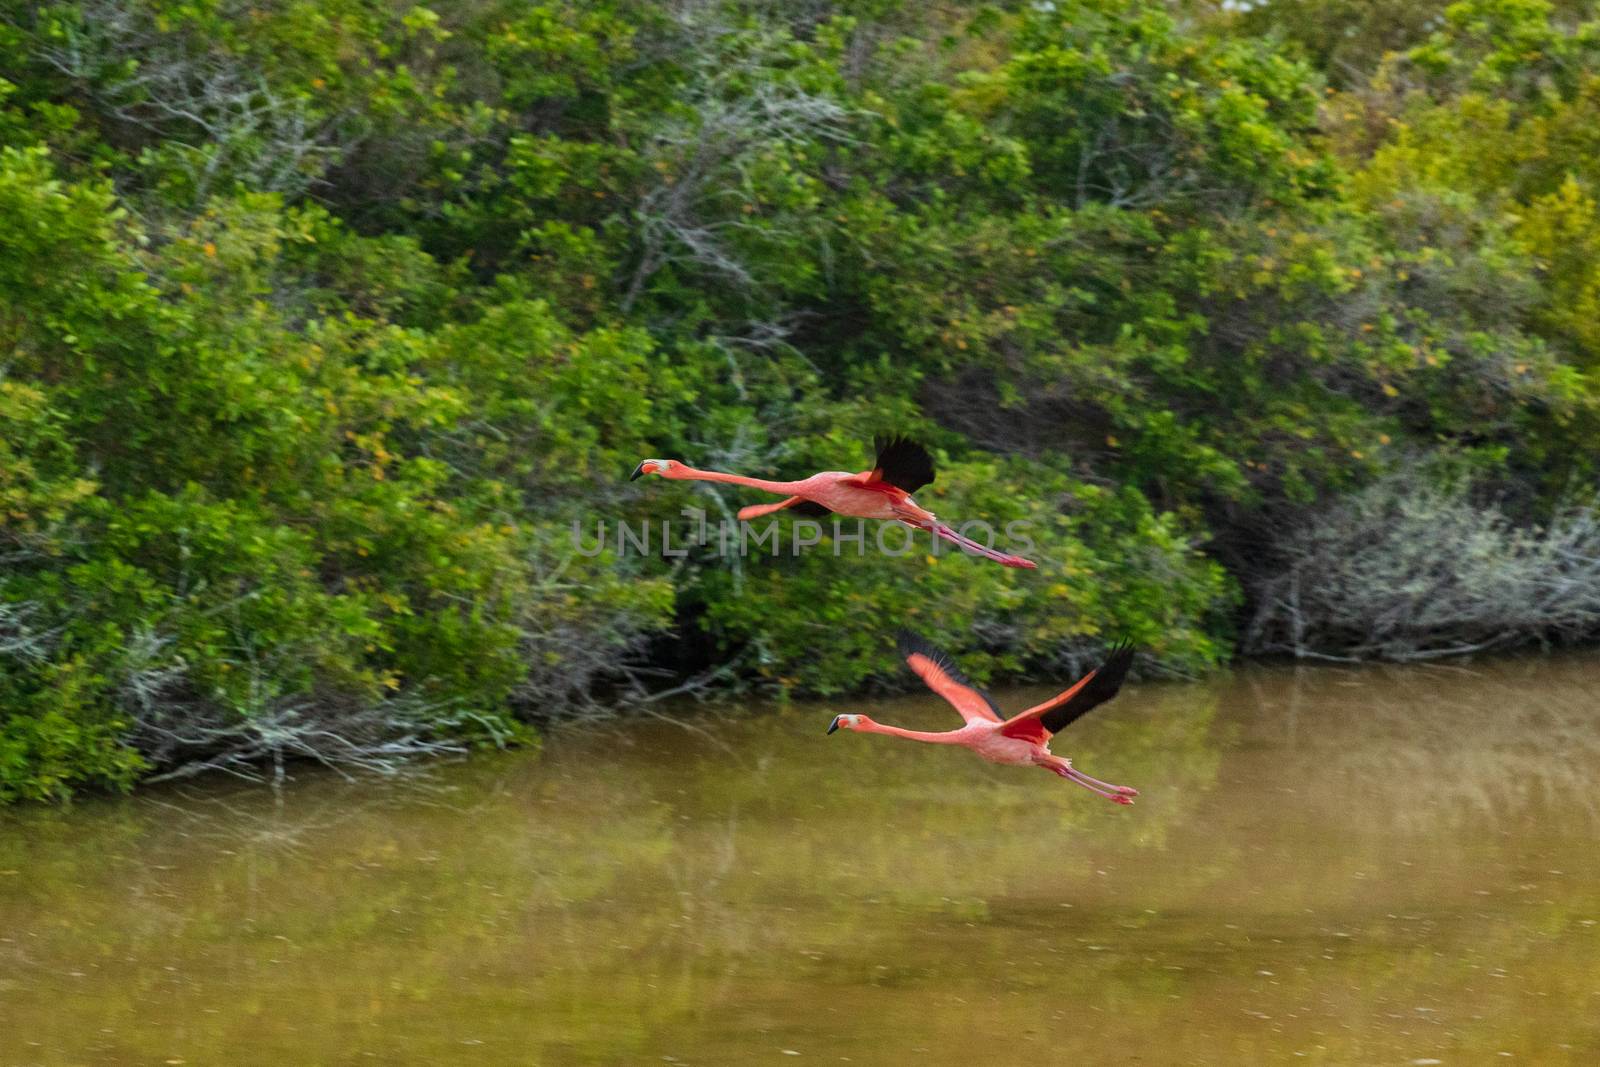 Galapagos Greater Flamingo flying by lagoon estuary and wetlands on Isabela Island. Two flamingos, Nature and wildlife on Galapagos Islands, Ecuador, South America.